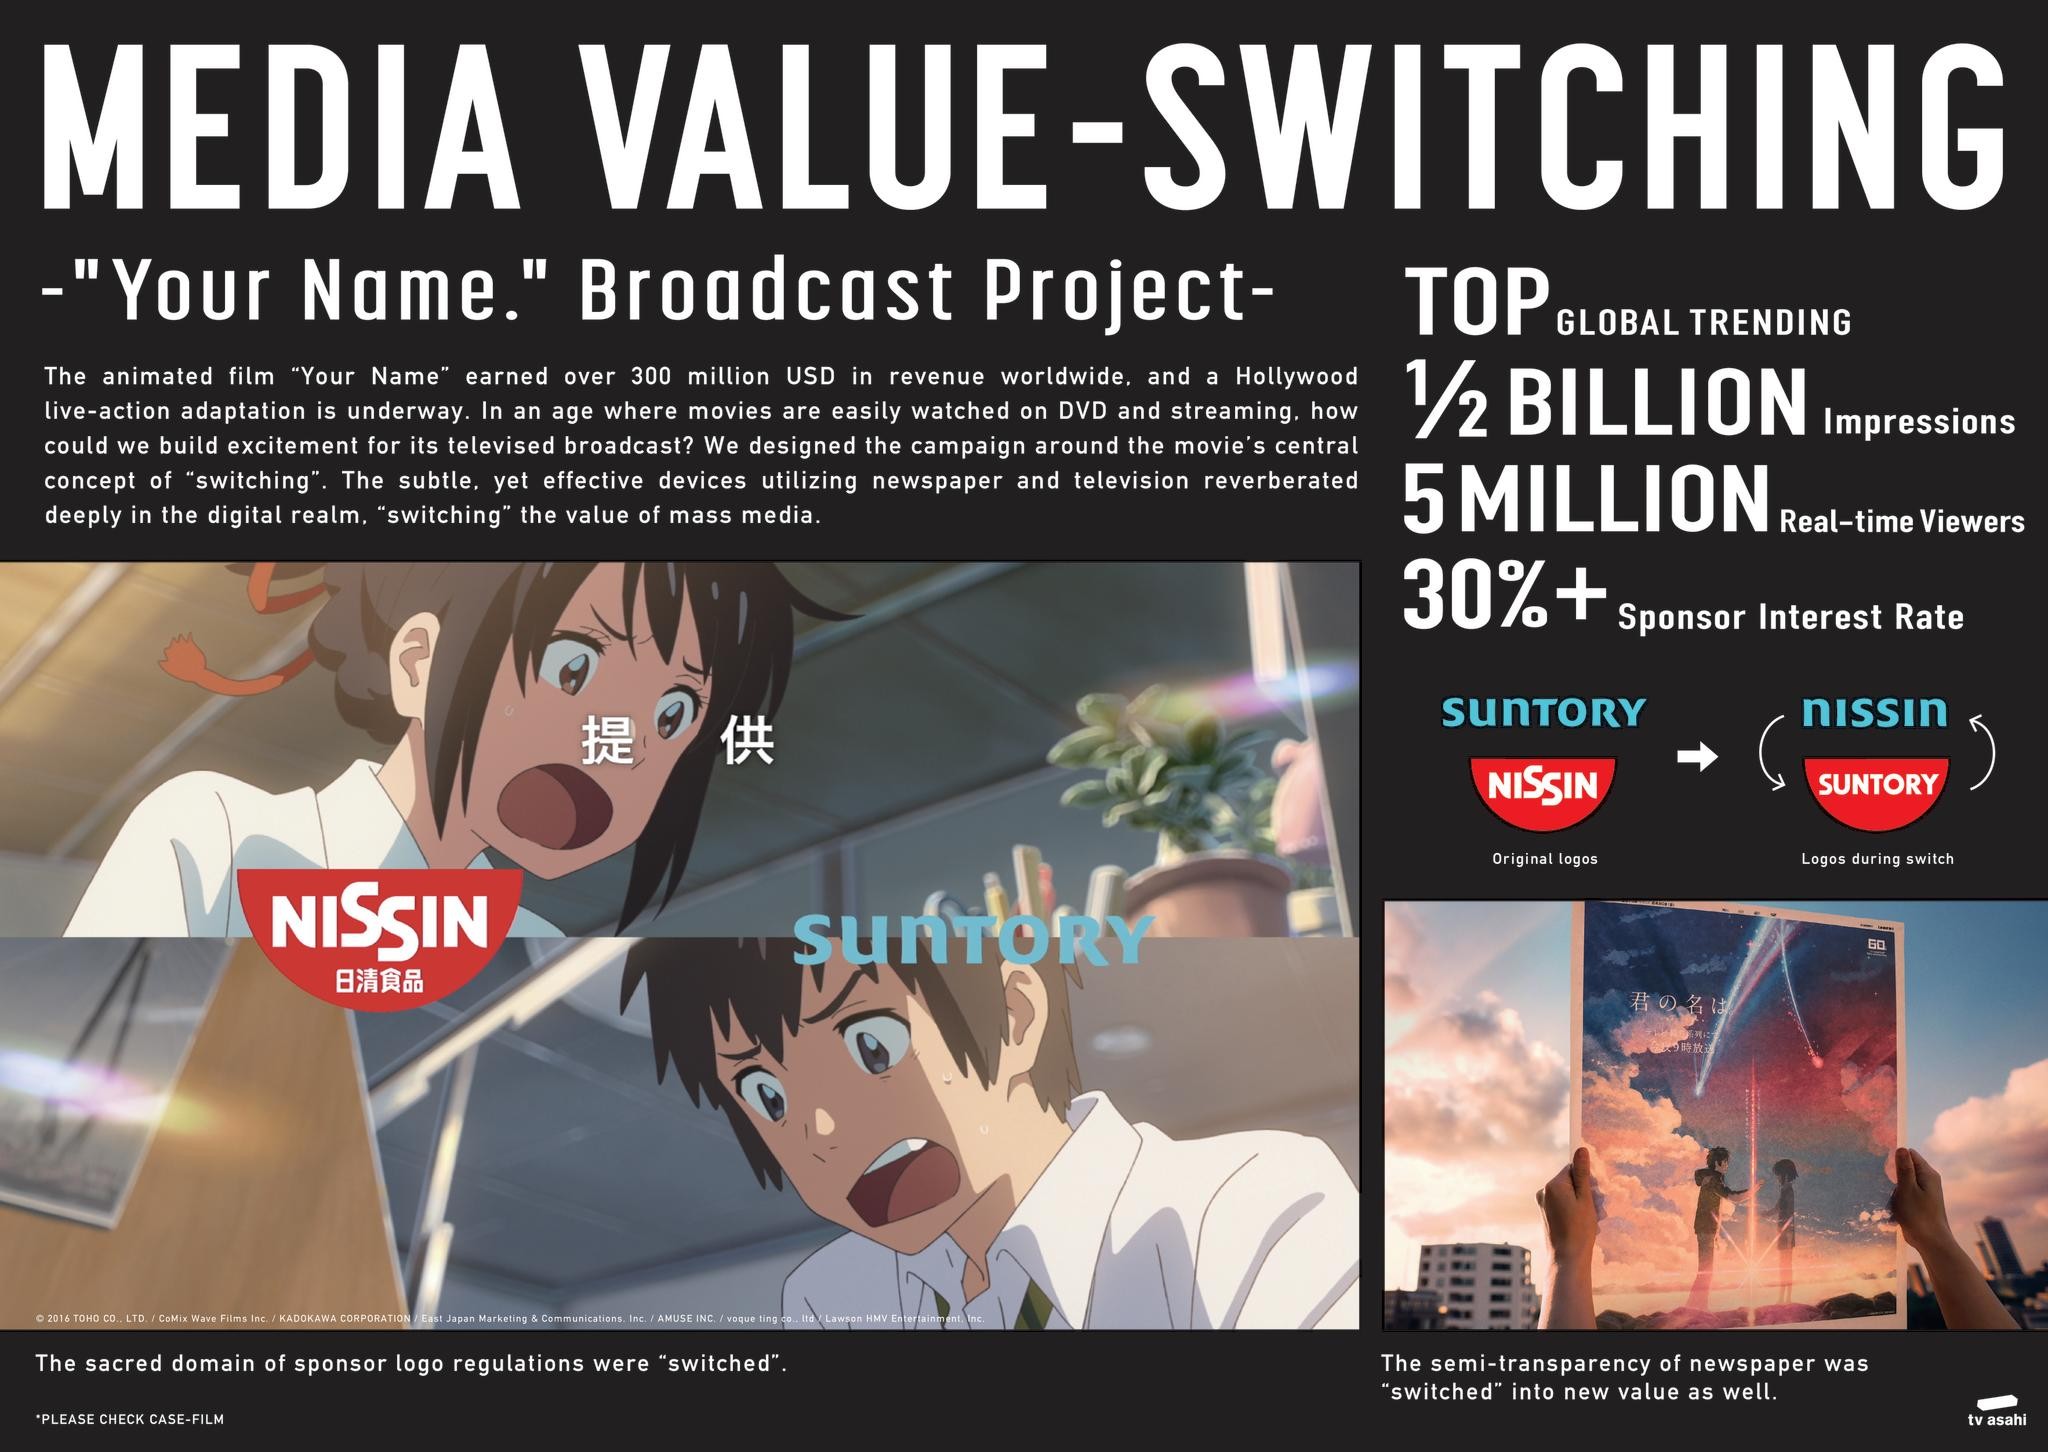 MEDIA VALUE-SWITCHING